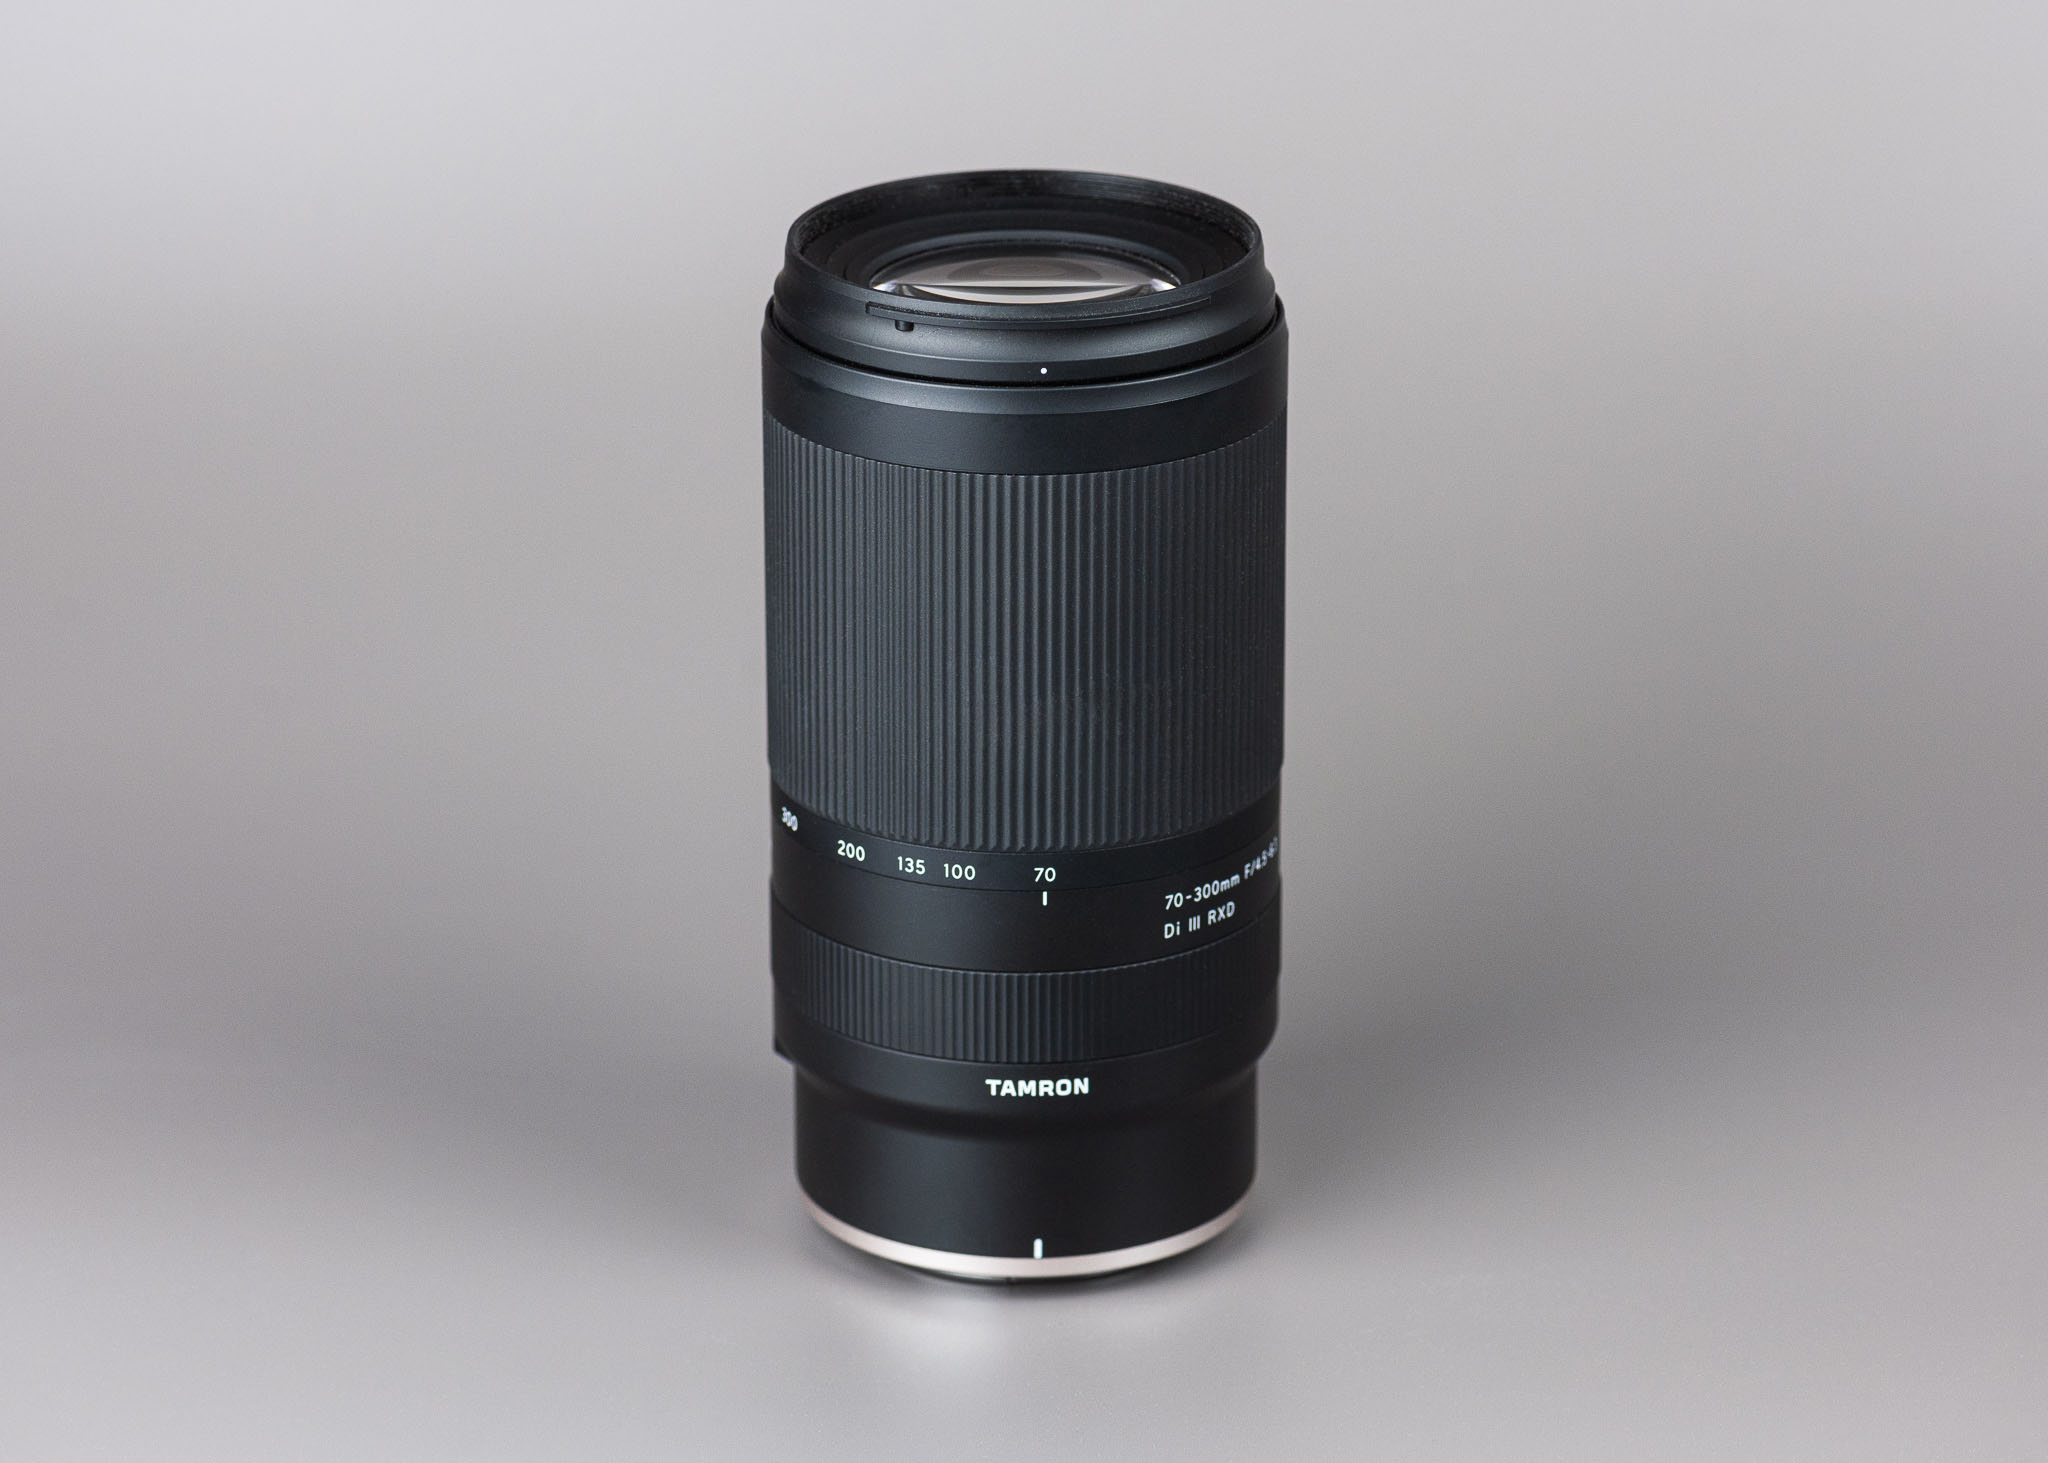 Tamron announces a compact $549 70-300mm F4.5-6.3 for Sony E mount cameras:  Digital Photography Review